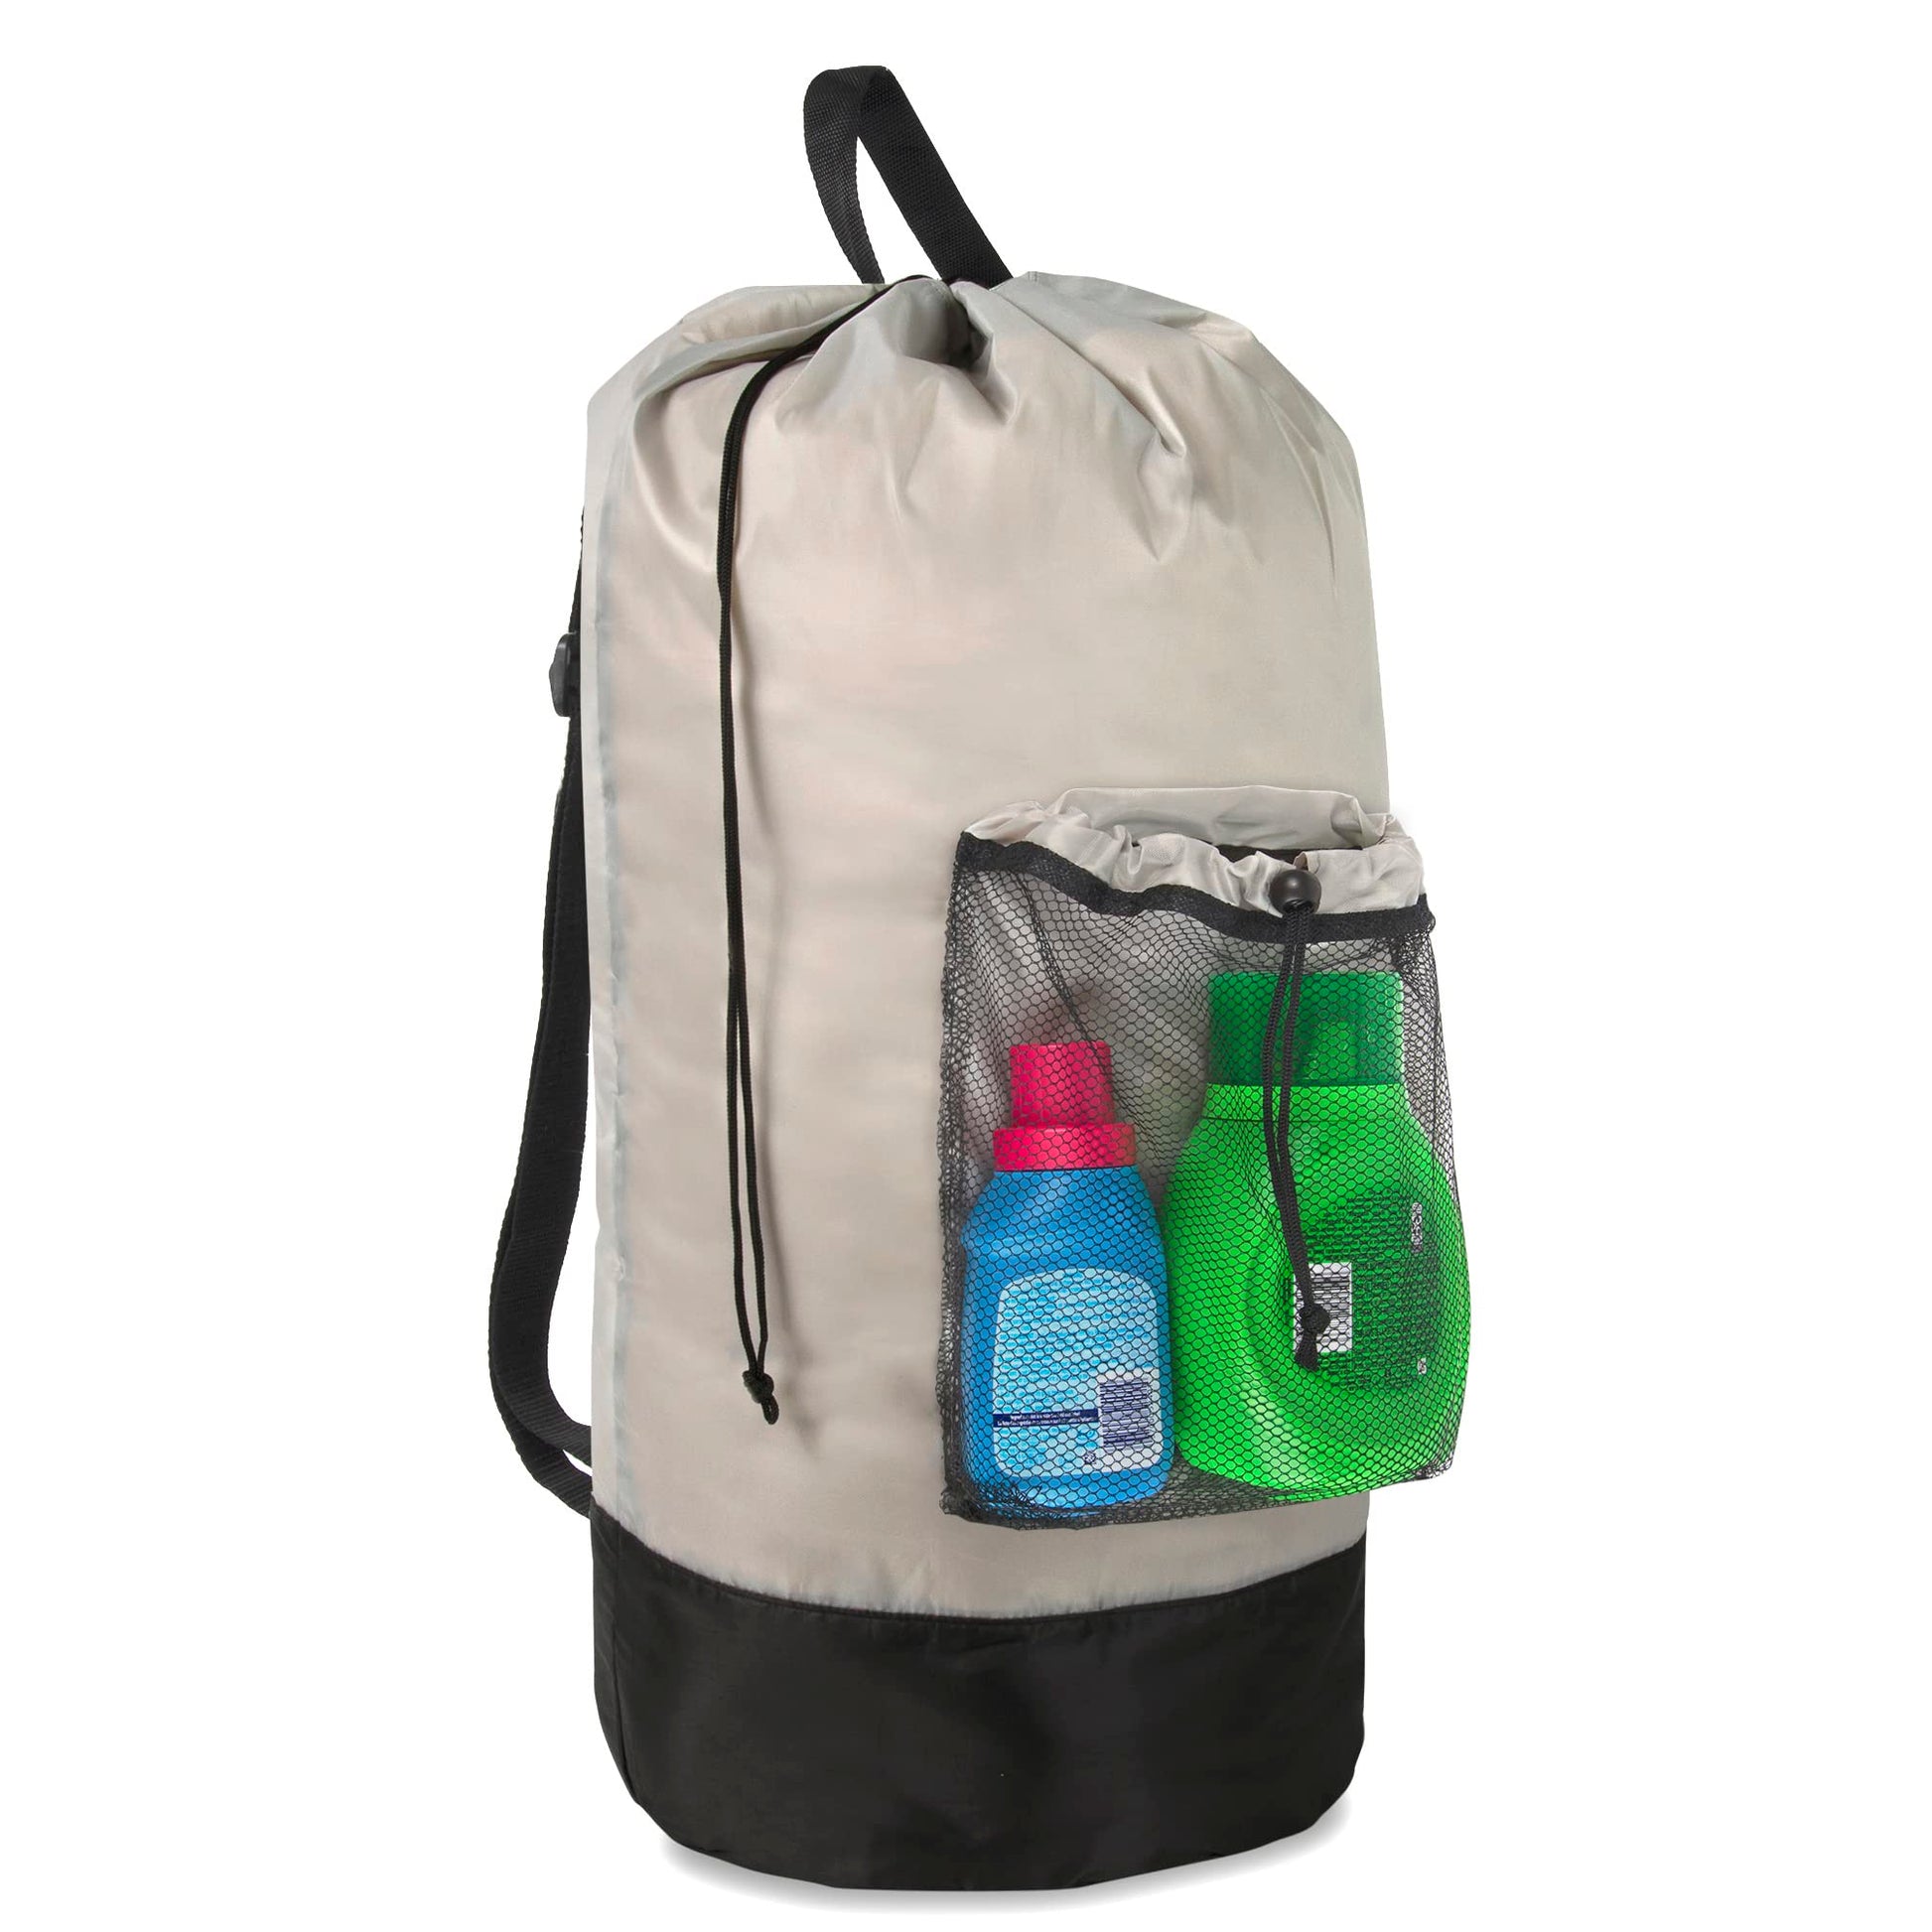 Laundry Bag Backpack with Straps, Heavy Duty for College Students, Travel</li>     <li>Portable Laundry Hamper Bags